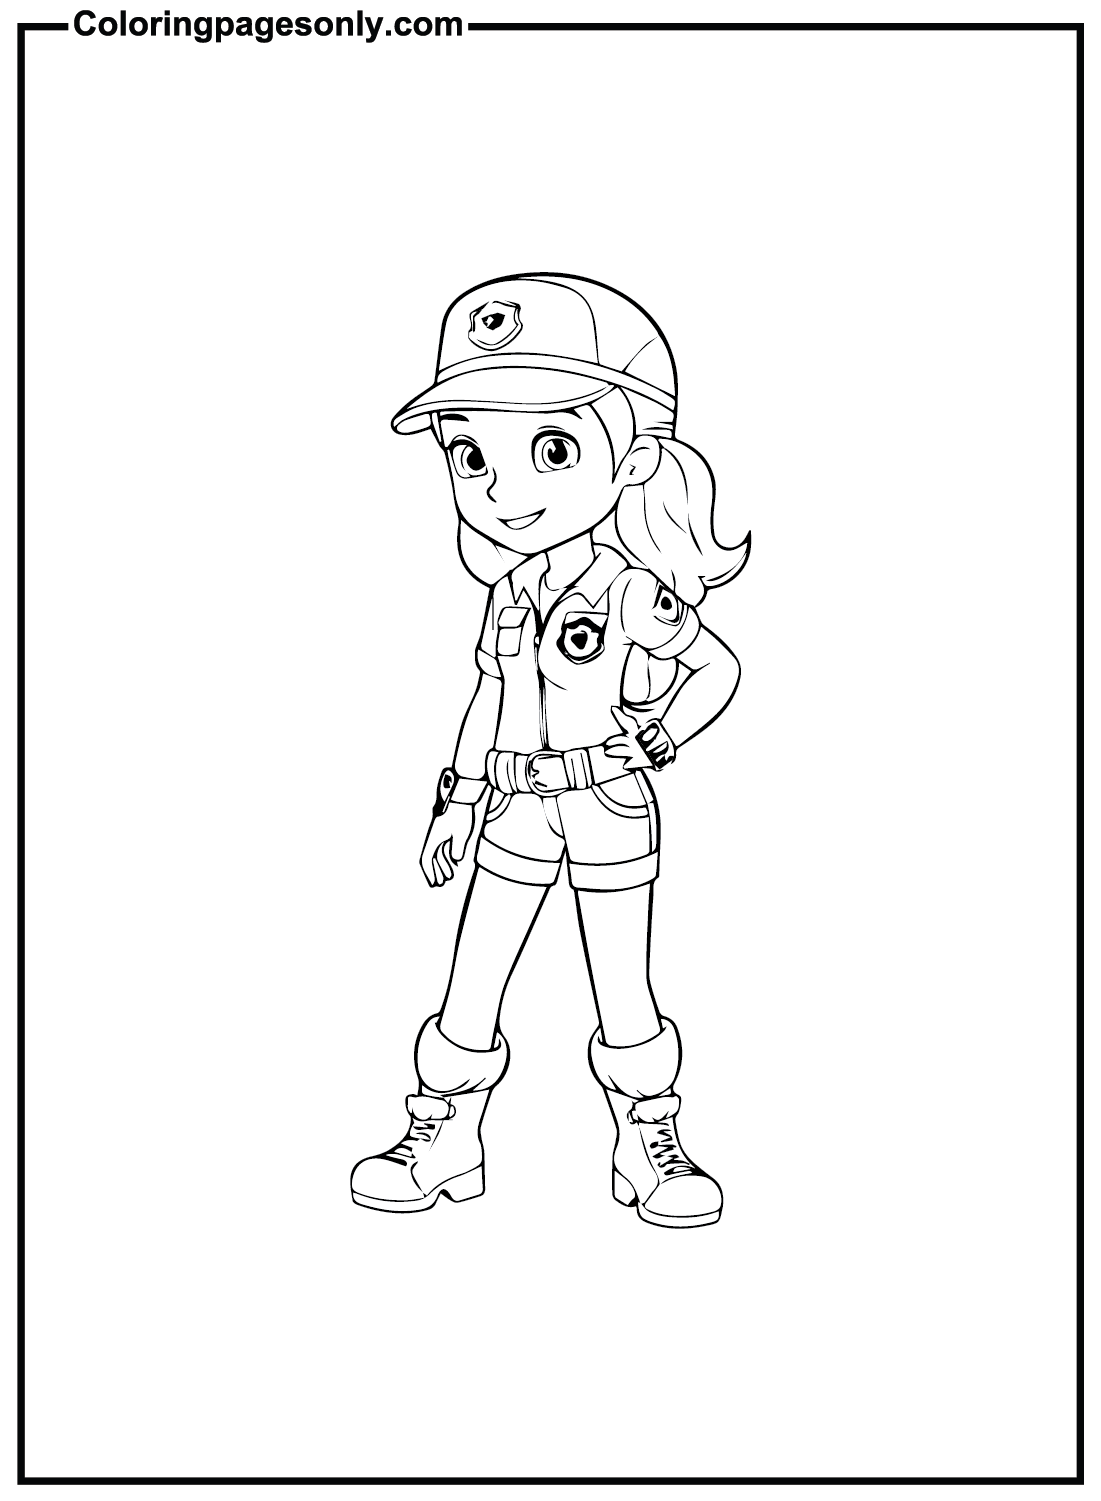 Rainbow Rangers For Kids Coloring Pages